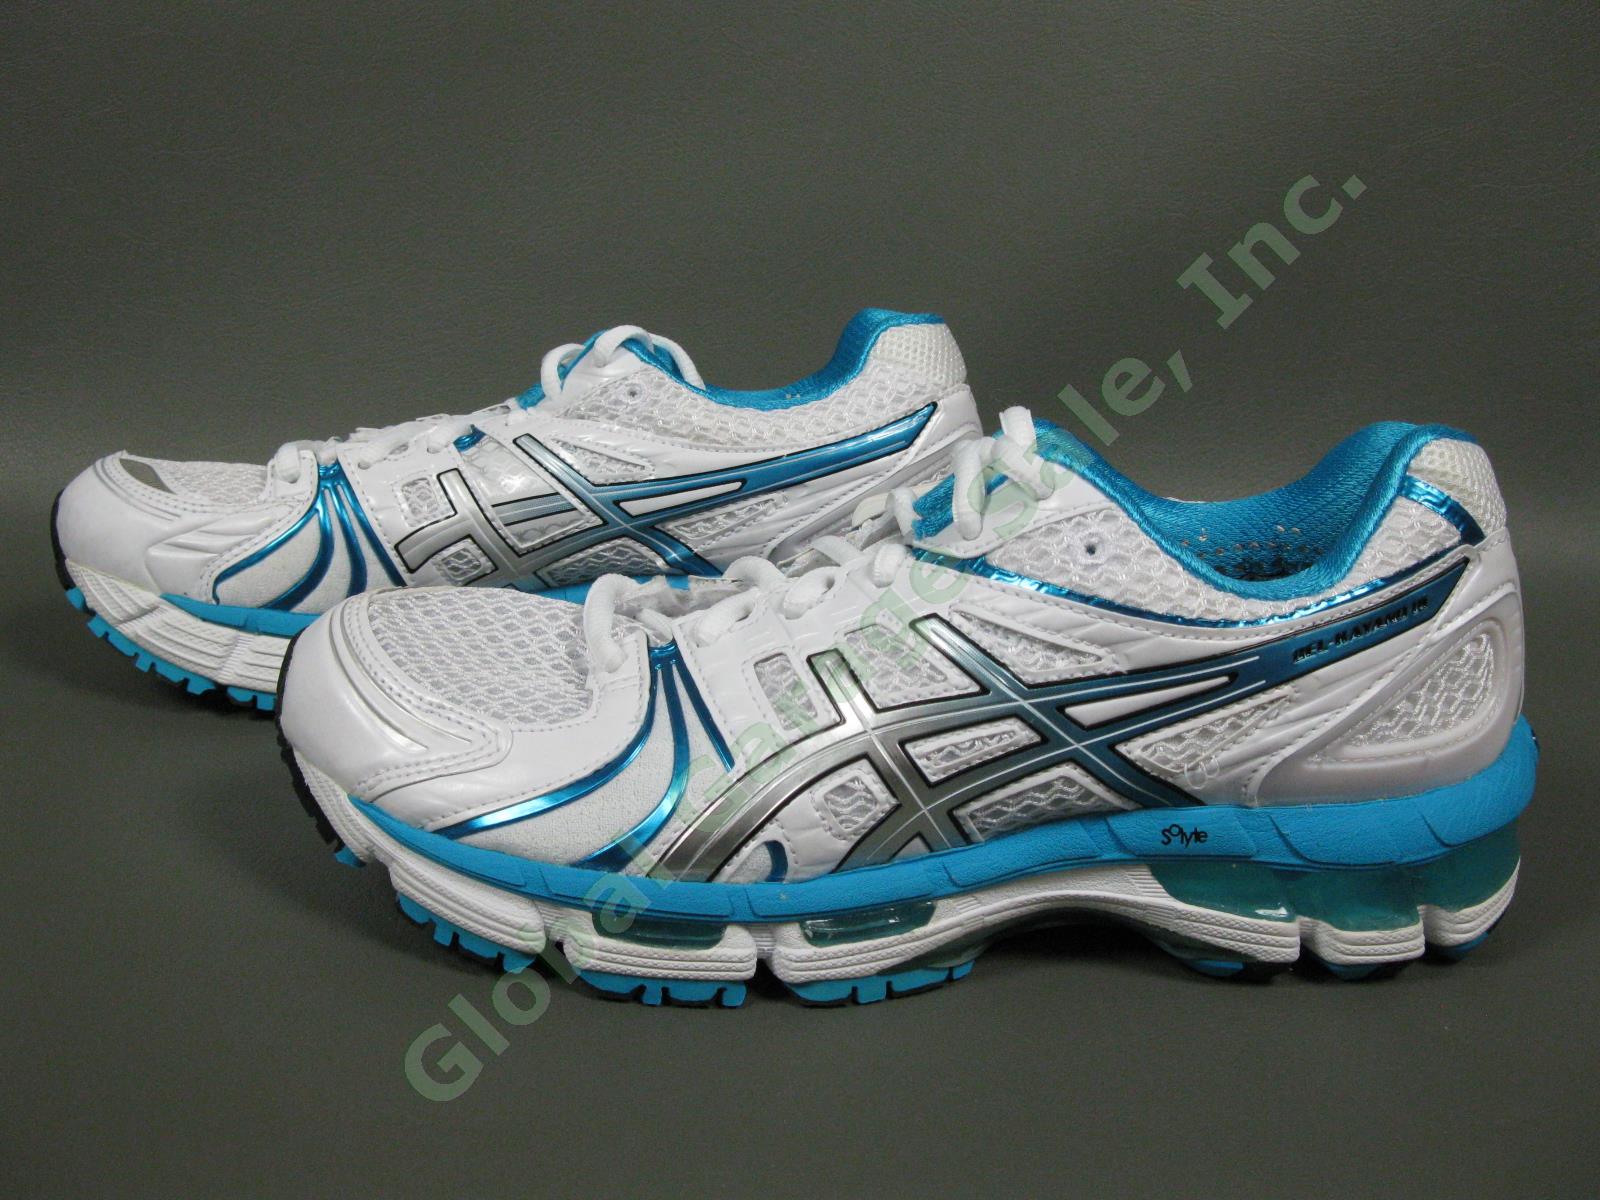 NEW Asics Gel Kayano-18 Womens White/Blue Running Sneakers Pair Size US-8 Shoes 1